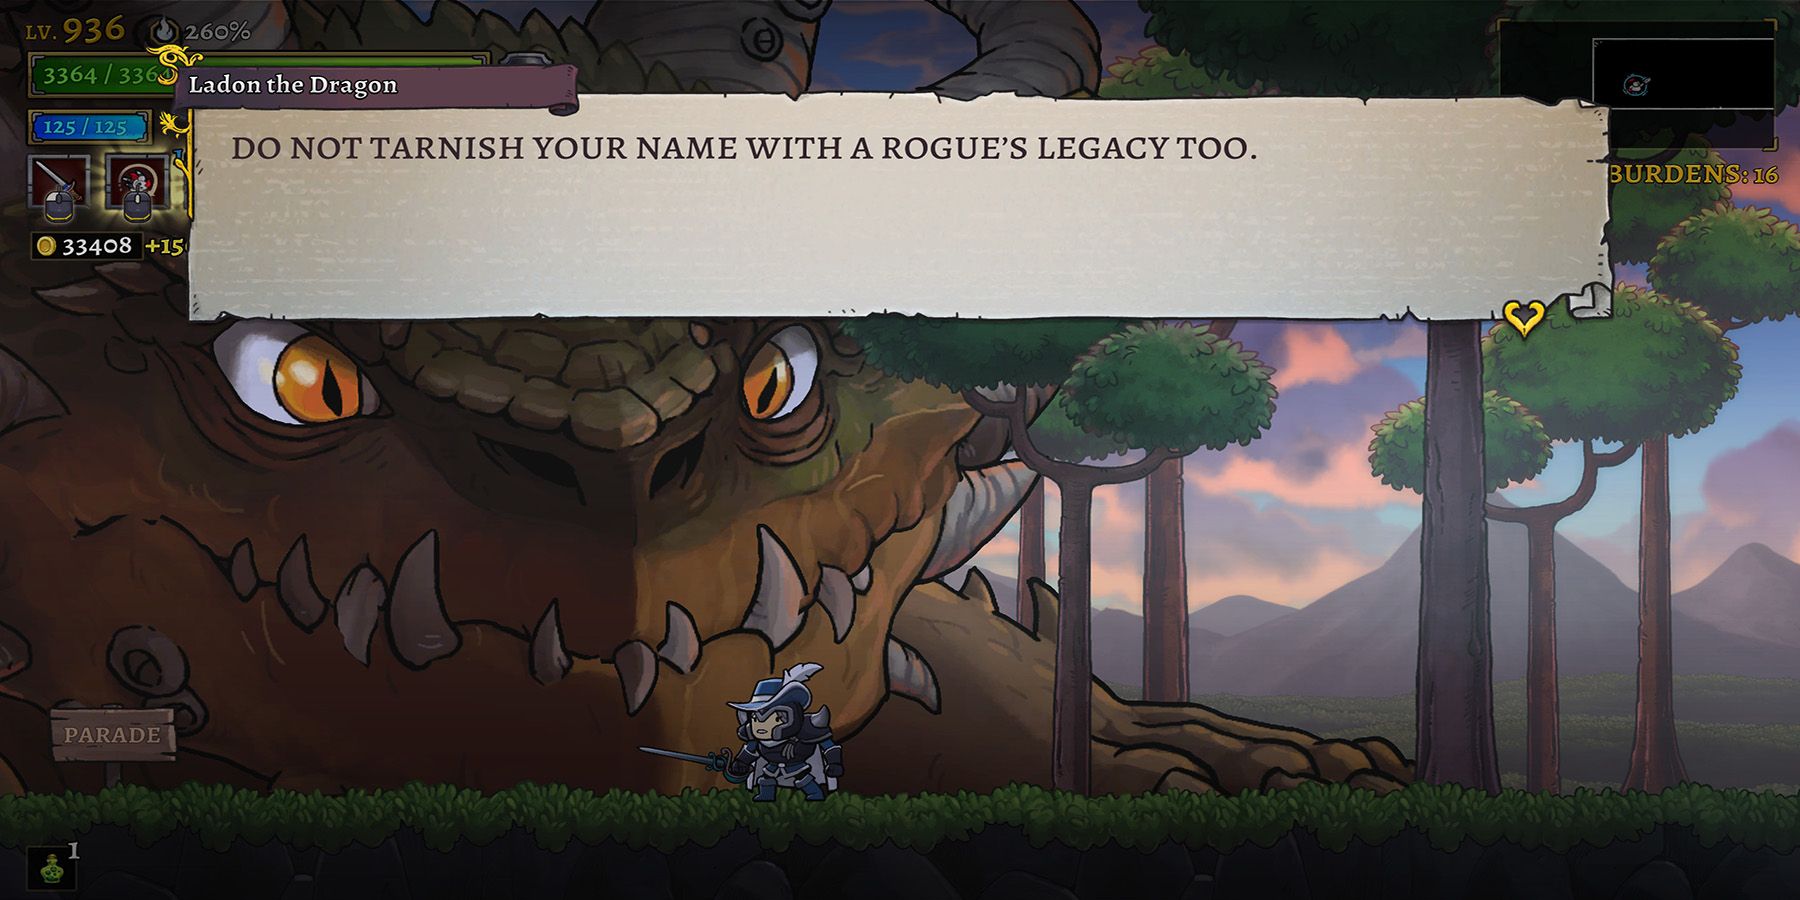 image showing a dialogue from the true ending in rogue legacy 2. 